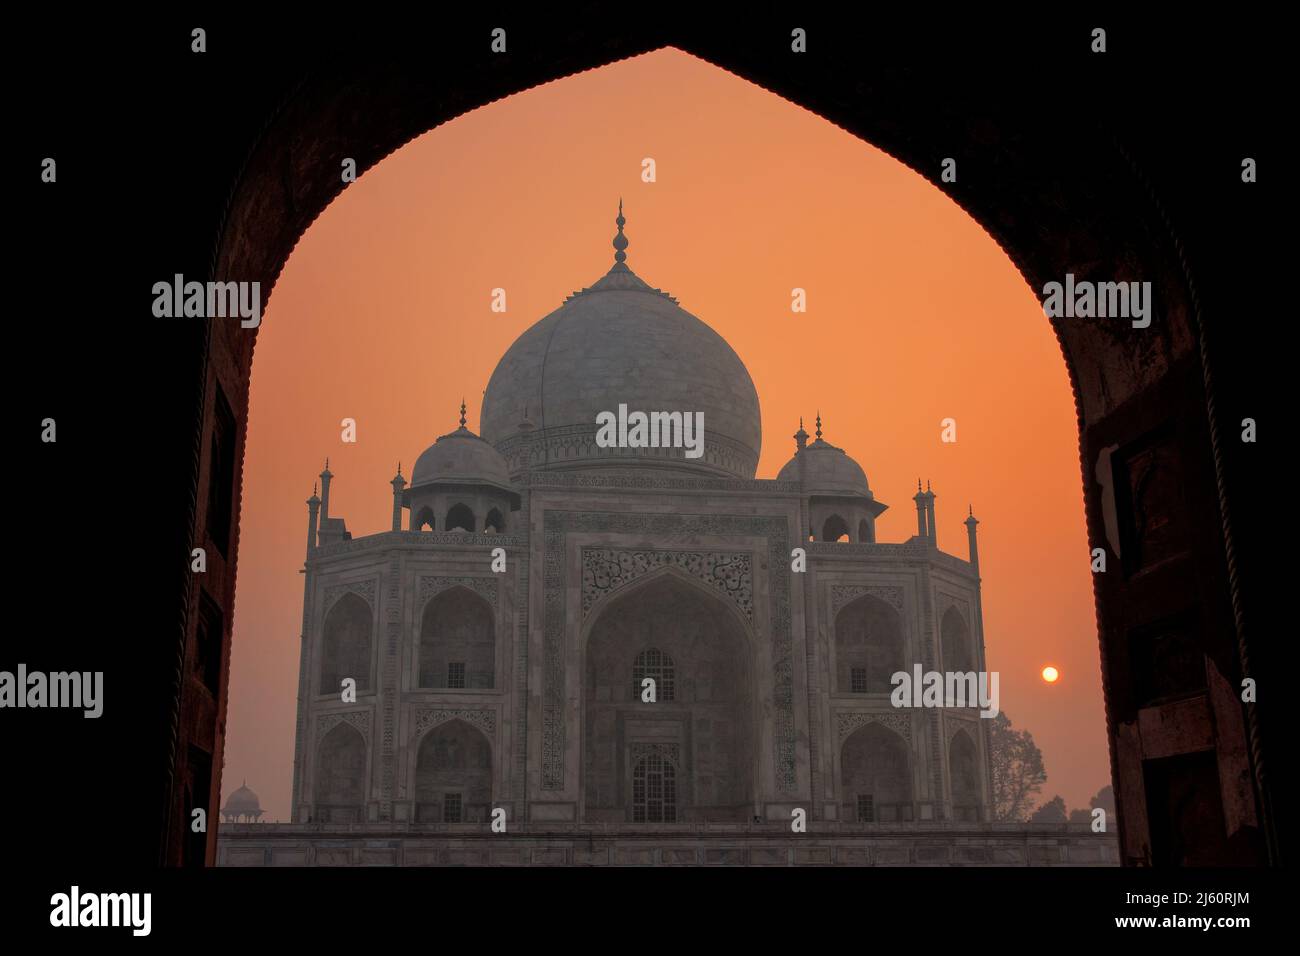 Taj Mahal at sunrise framed with the arch of the mosque, Agra, Uttar Pradesh, India. Taj Mahal was designated as a UNESCO World Heritage Site in 1983. Stock Photo